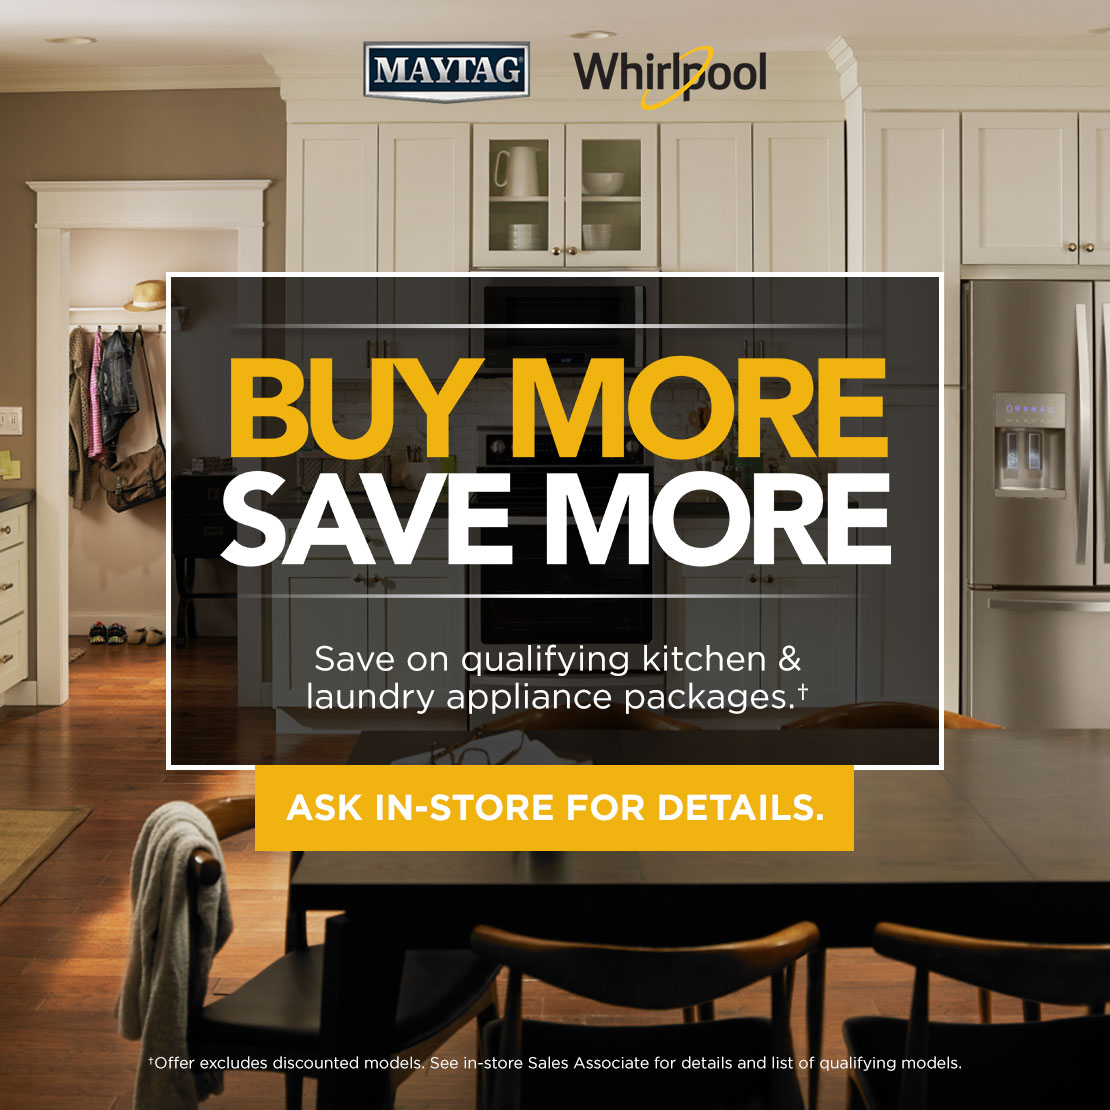 Buy More Save More Event from Maytag and Whirlpool